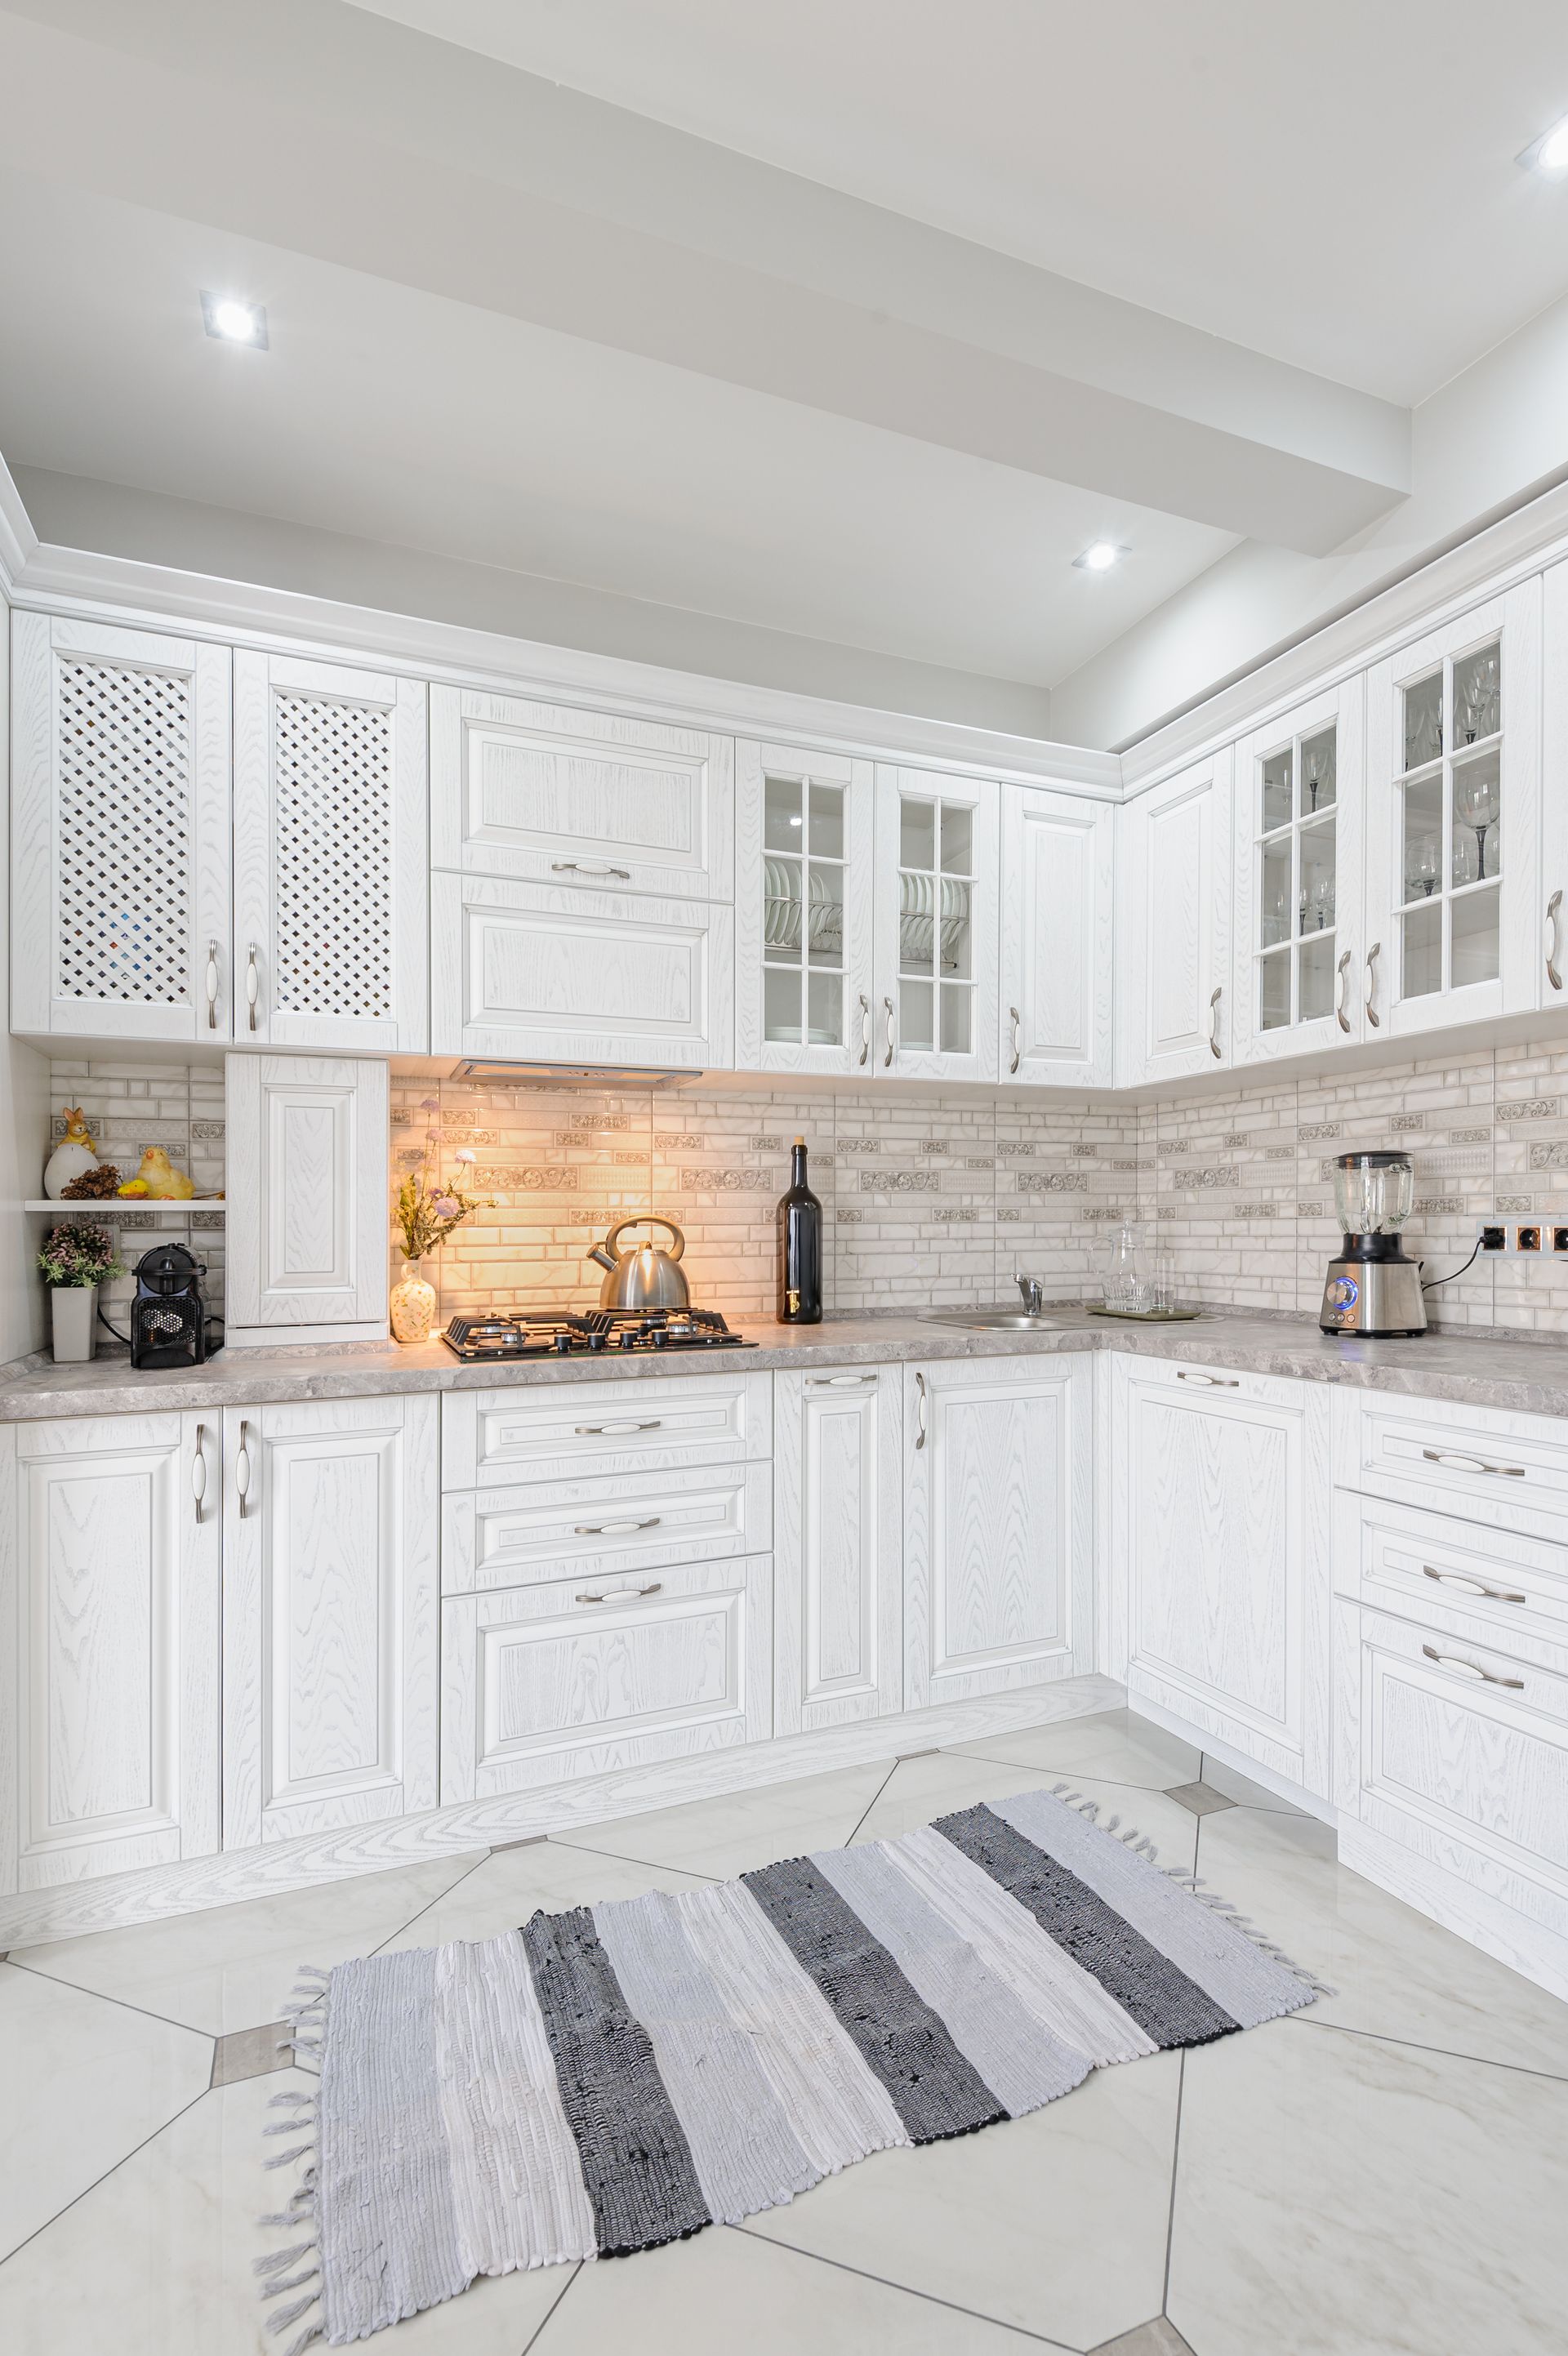 Get the Kitchen of Your Dreams With Help From the Contractors at Sigma Construction Group in Naples.